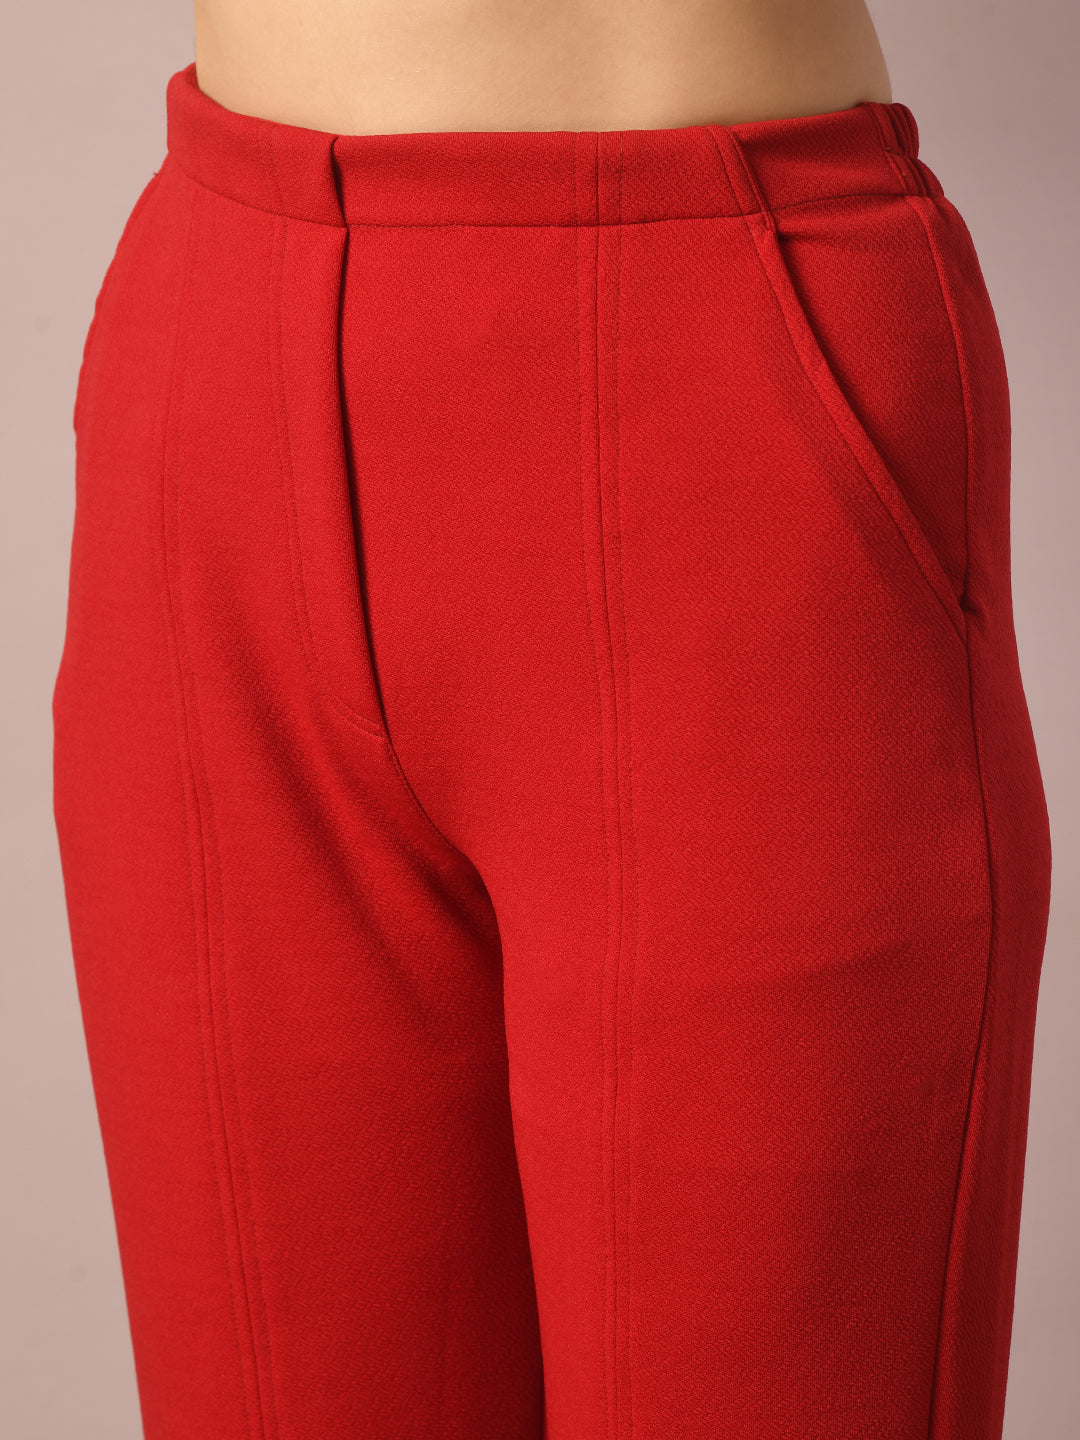 Women's  Red Solid Party Parallel Trousers   - Myshka